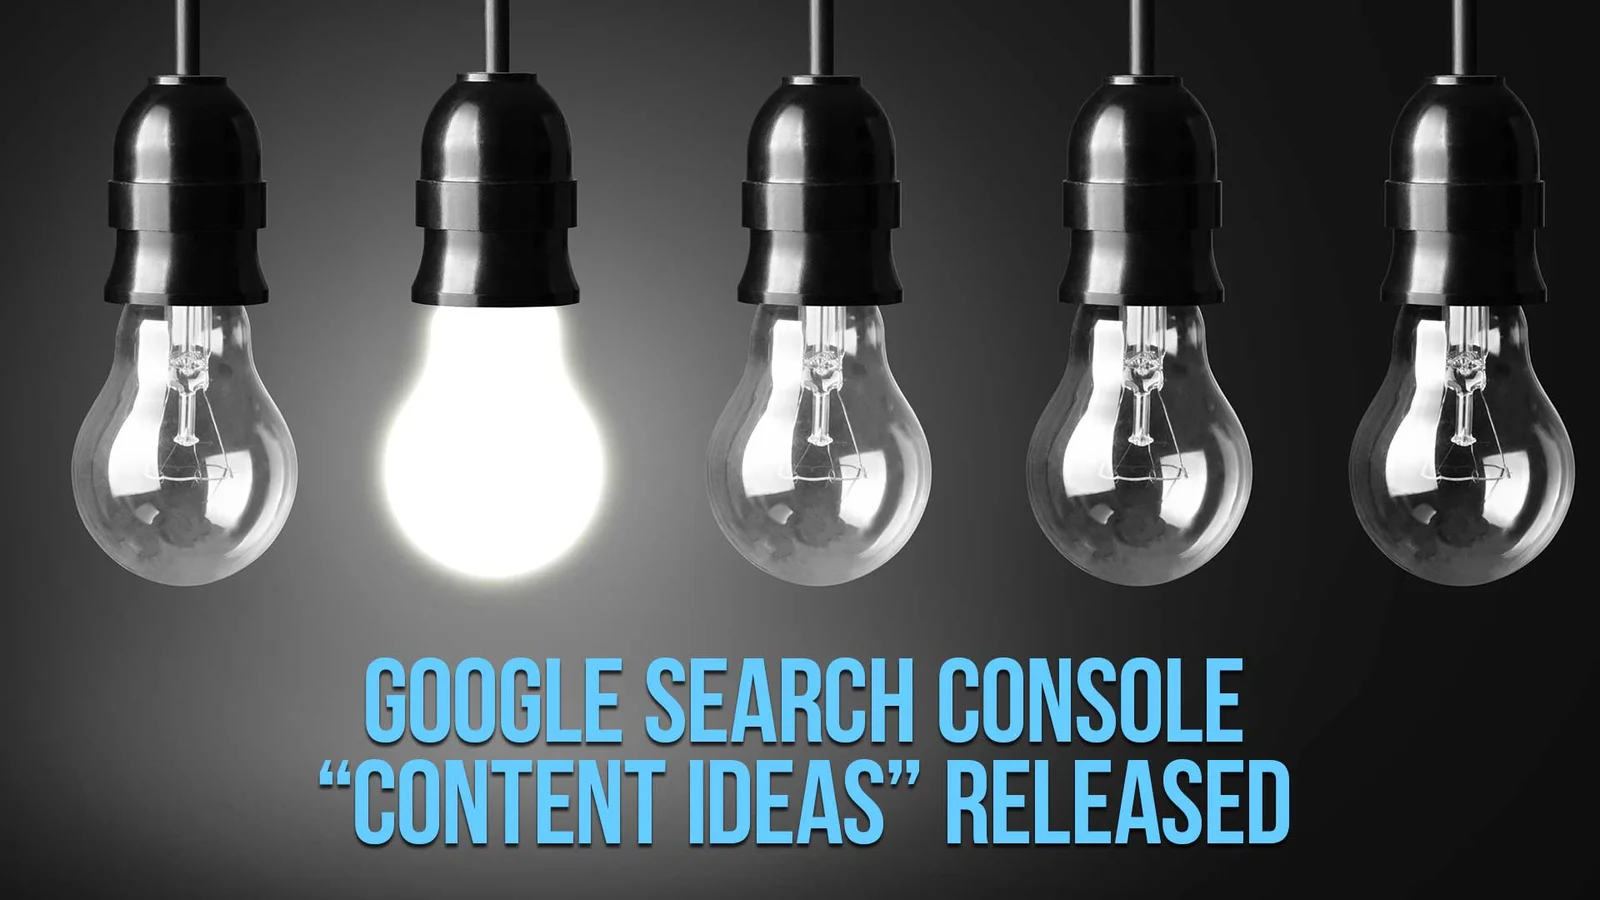 Google Search Console “Content Ideas” Released